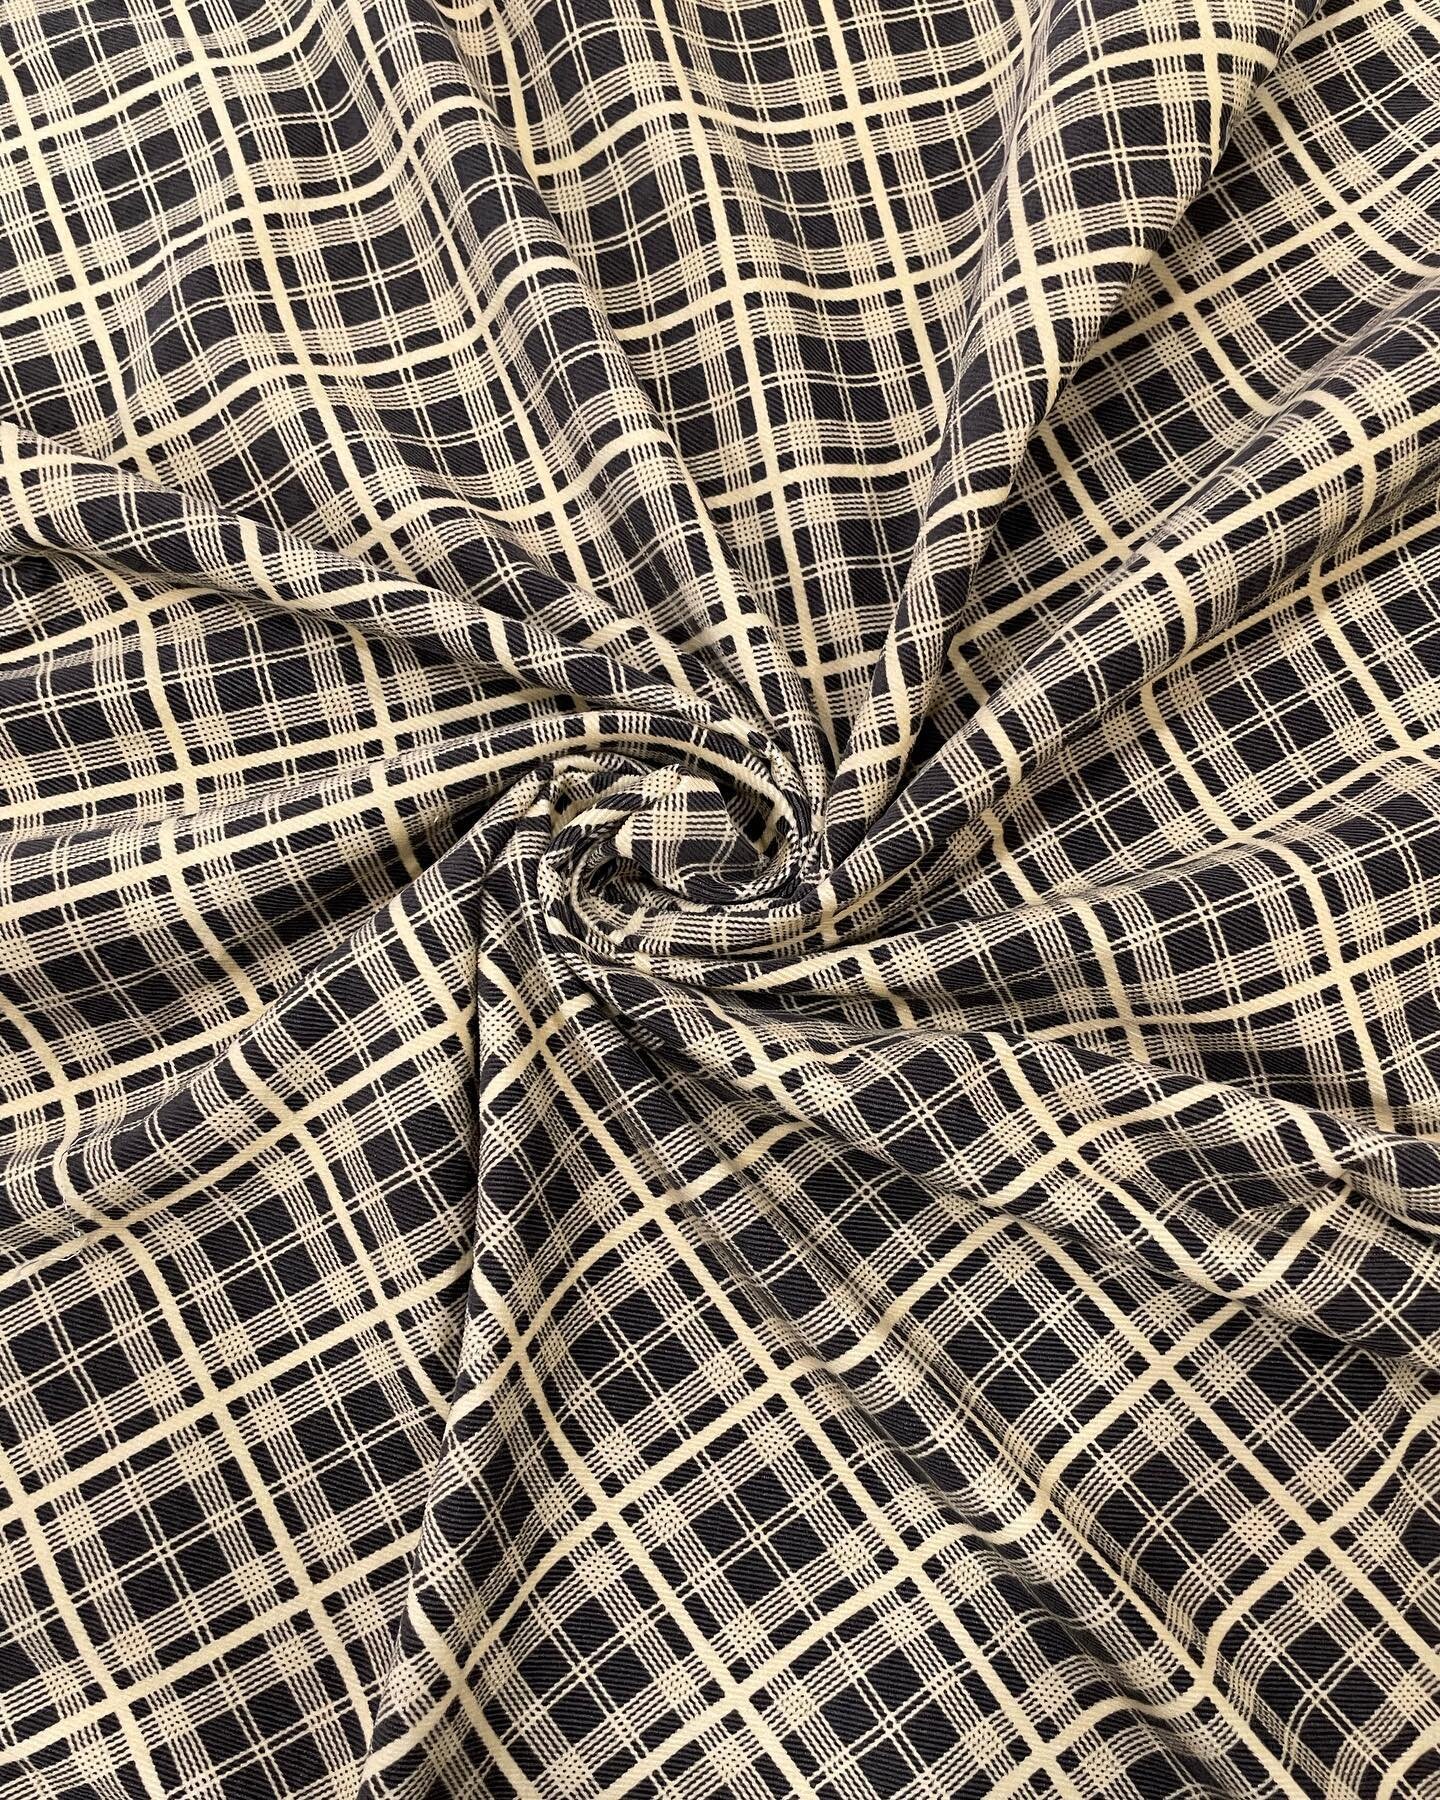 Hive mind: Cleo skirt in @dsquilts corduroy.  Do I skip the contrast hem band and add length for an all-plaid version or use black velvet for the hem band and pockets? 

#cleoskirt #dsquilts #chicopeefabric